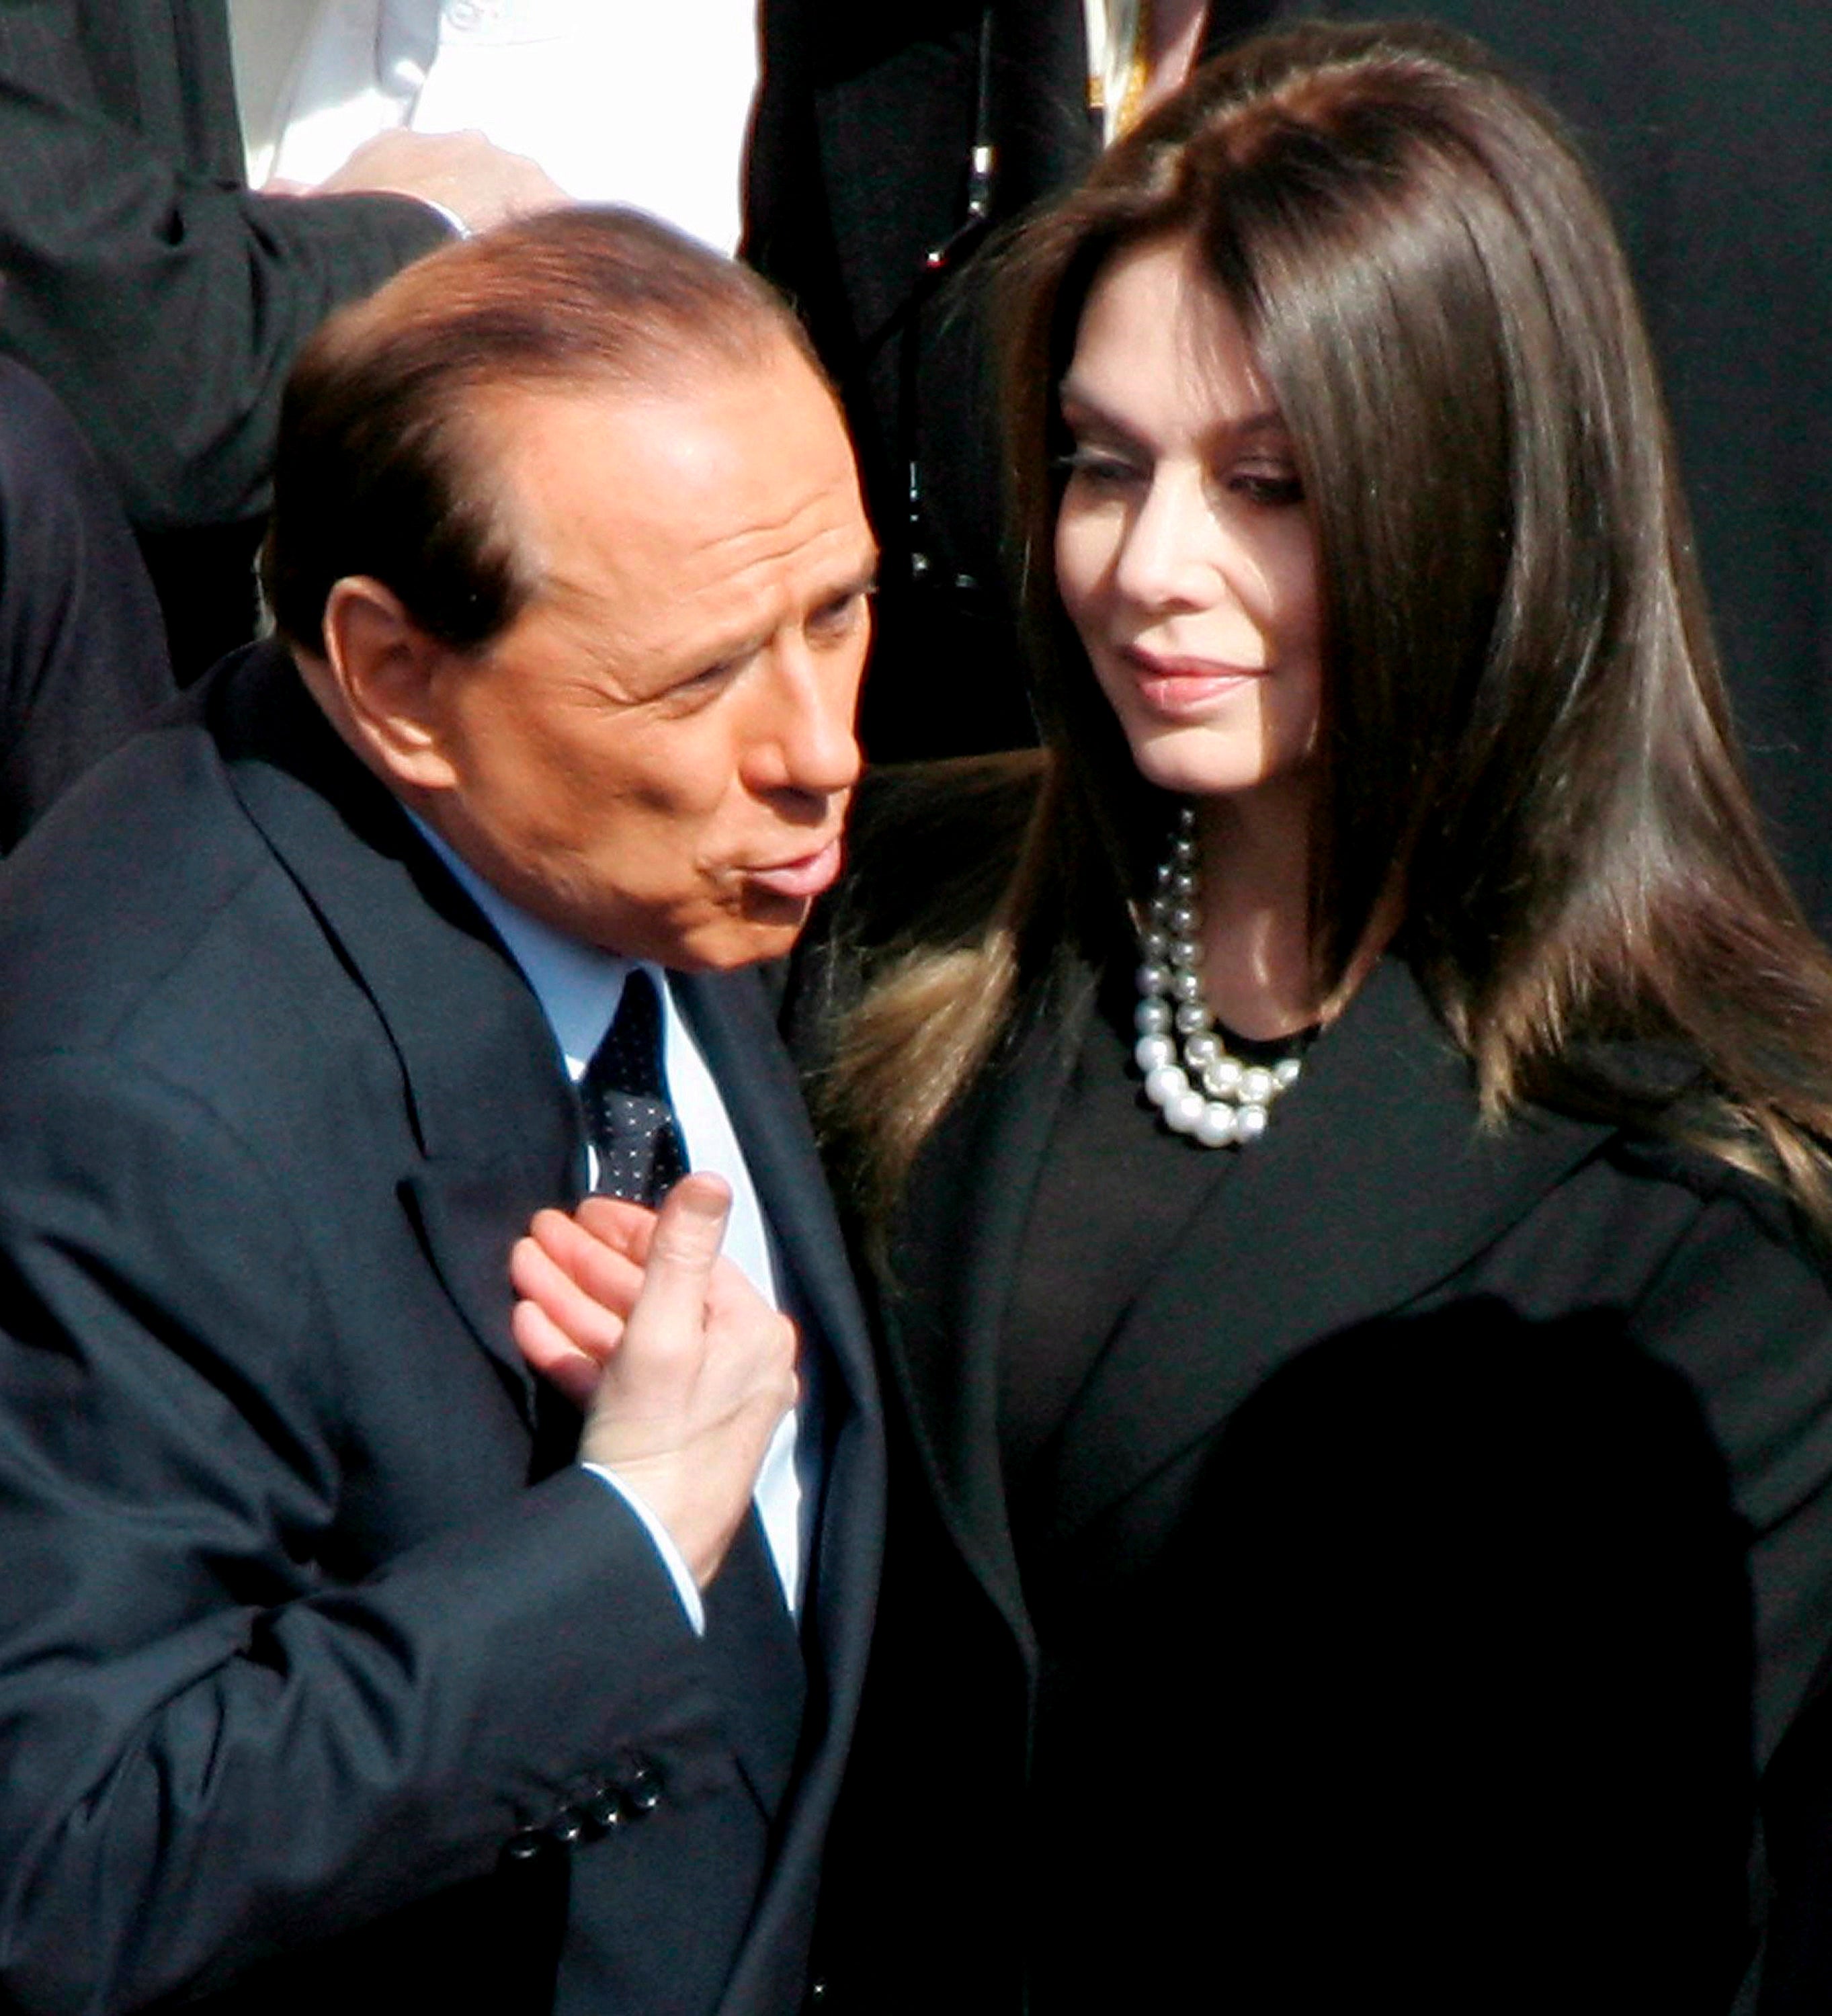 Berlusconi and his wife at the time, Veronica Lario, in 2005